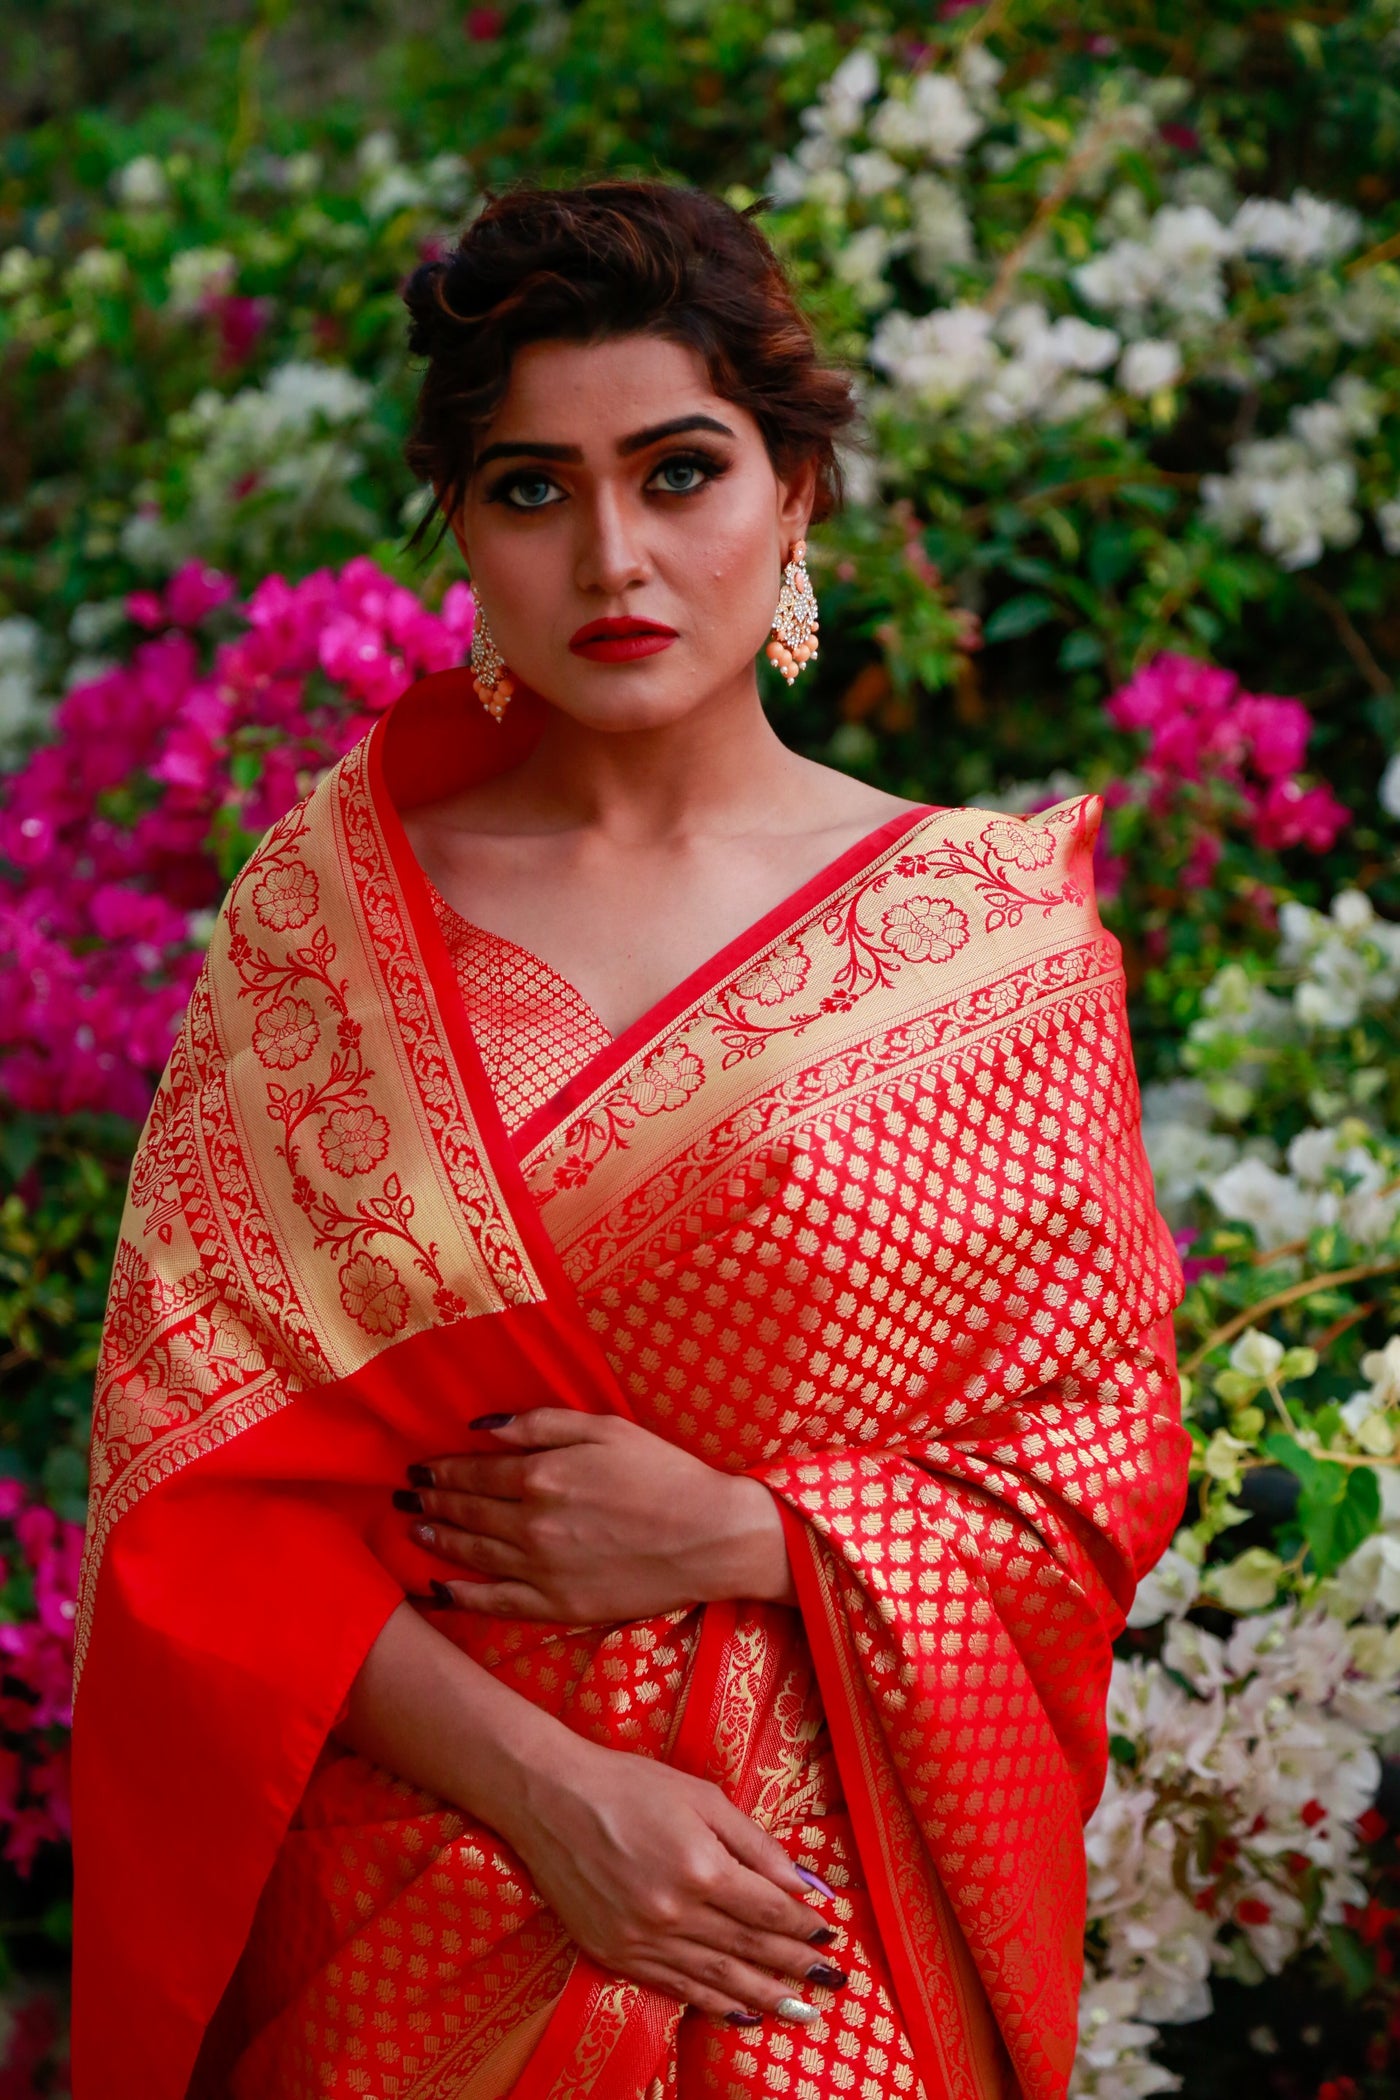 Red Banarasi Silk Saree Indian Clothing in Denver, CO, Aurora, CO, Boulder, CO, Fort Collins, CO, Colorado Springs, CO, Parker, CO, Highlands Ranch, CO, Cherry Creek, CO, Centennial, CO, and Longmont, CO. NATIONWIDE SHIPPING USA- India Fashion X